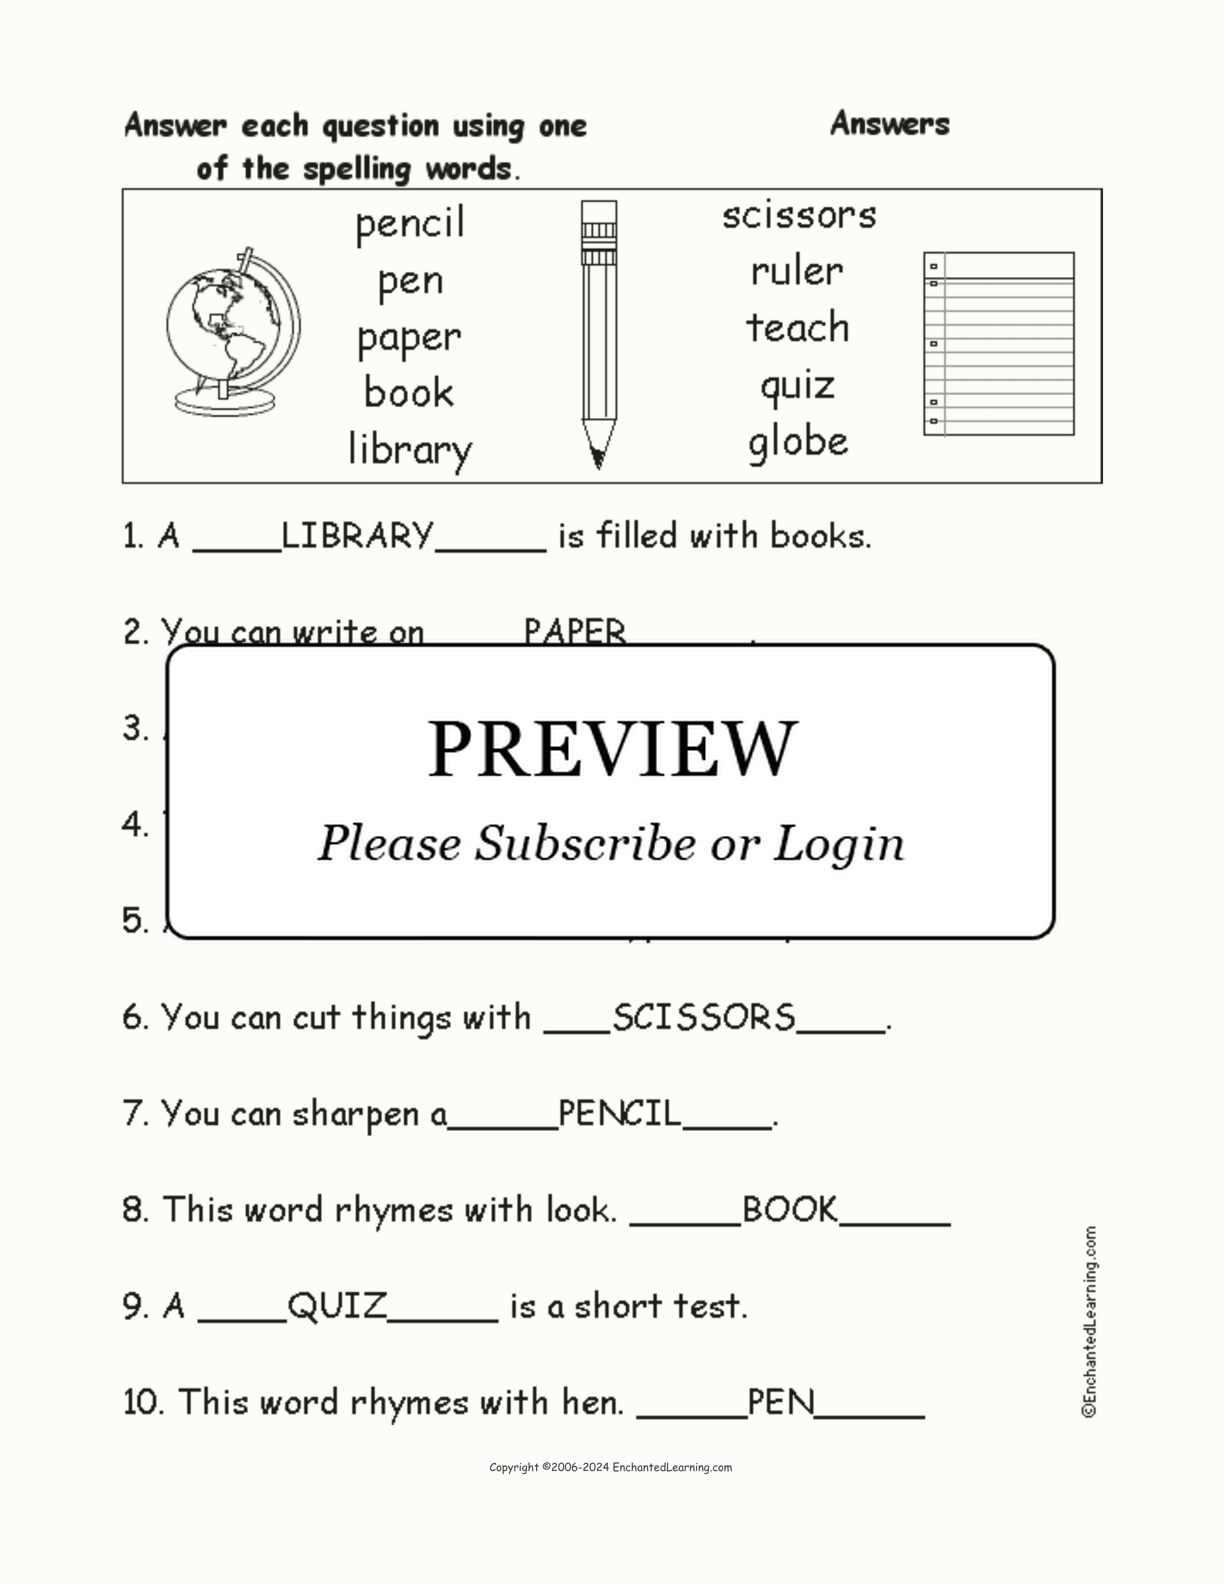 School Spelling Word Questions interactive worksheet page 2